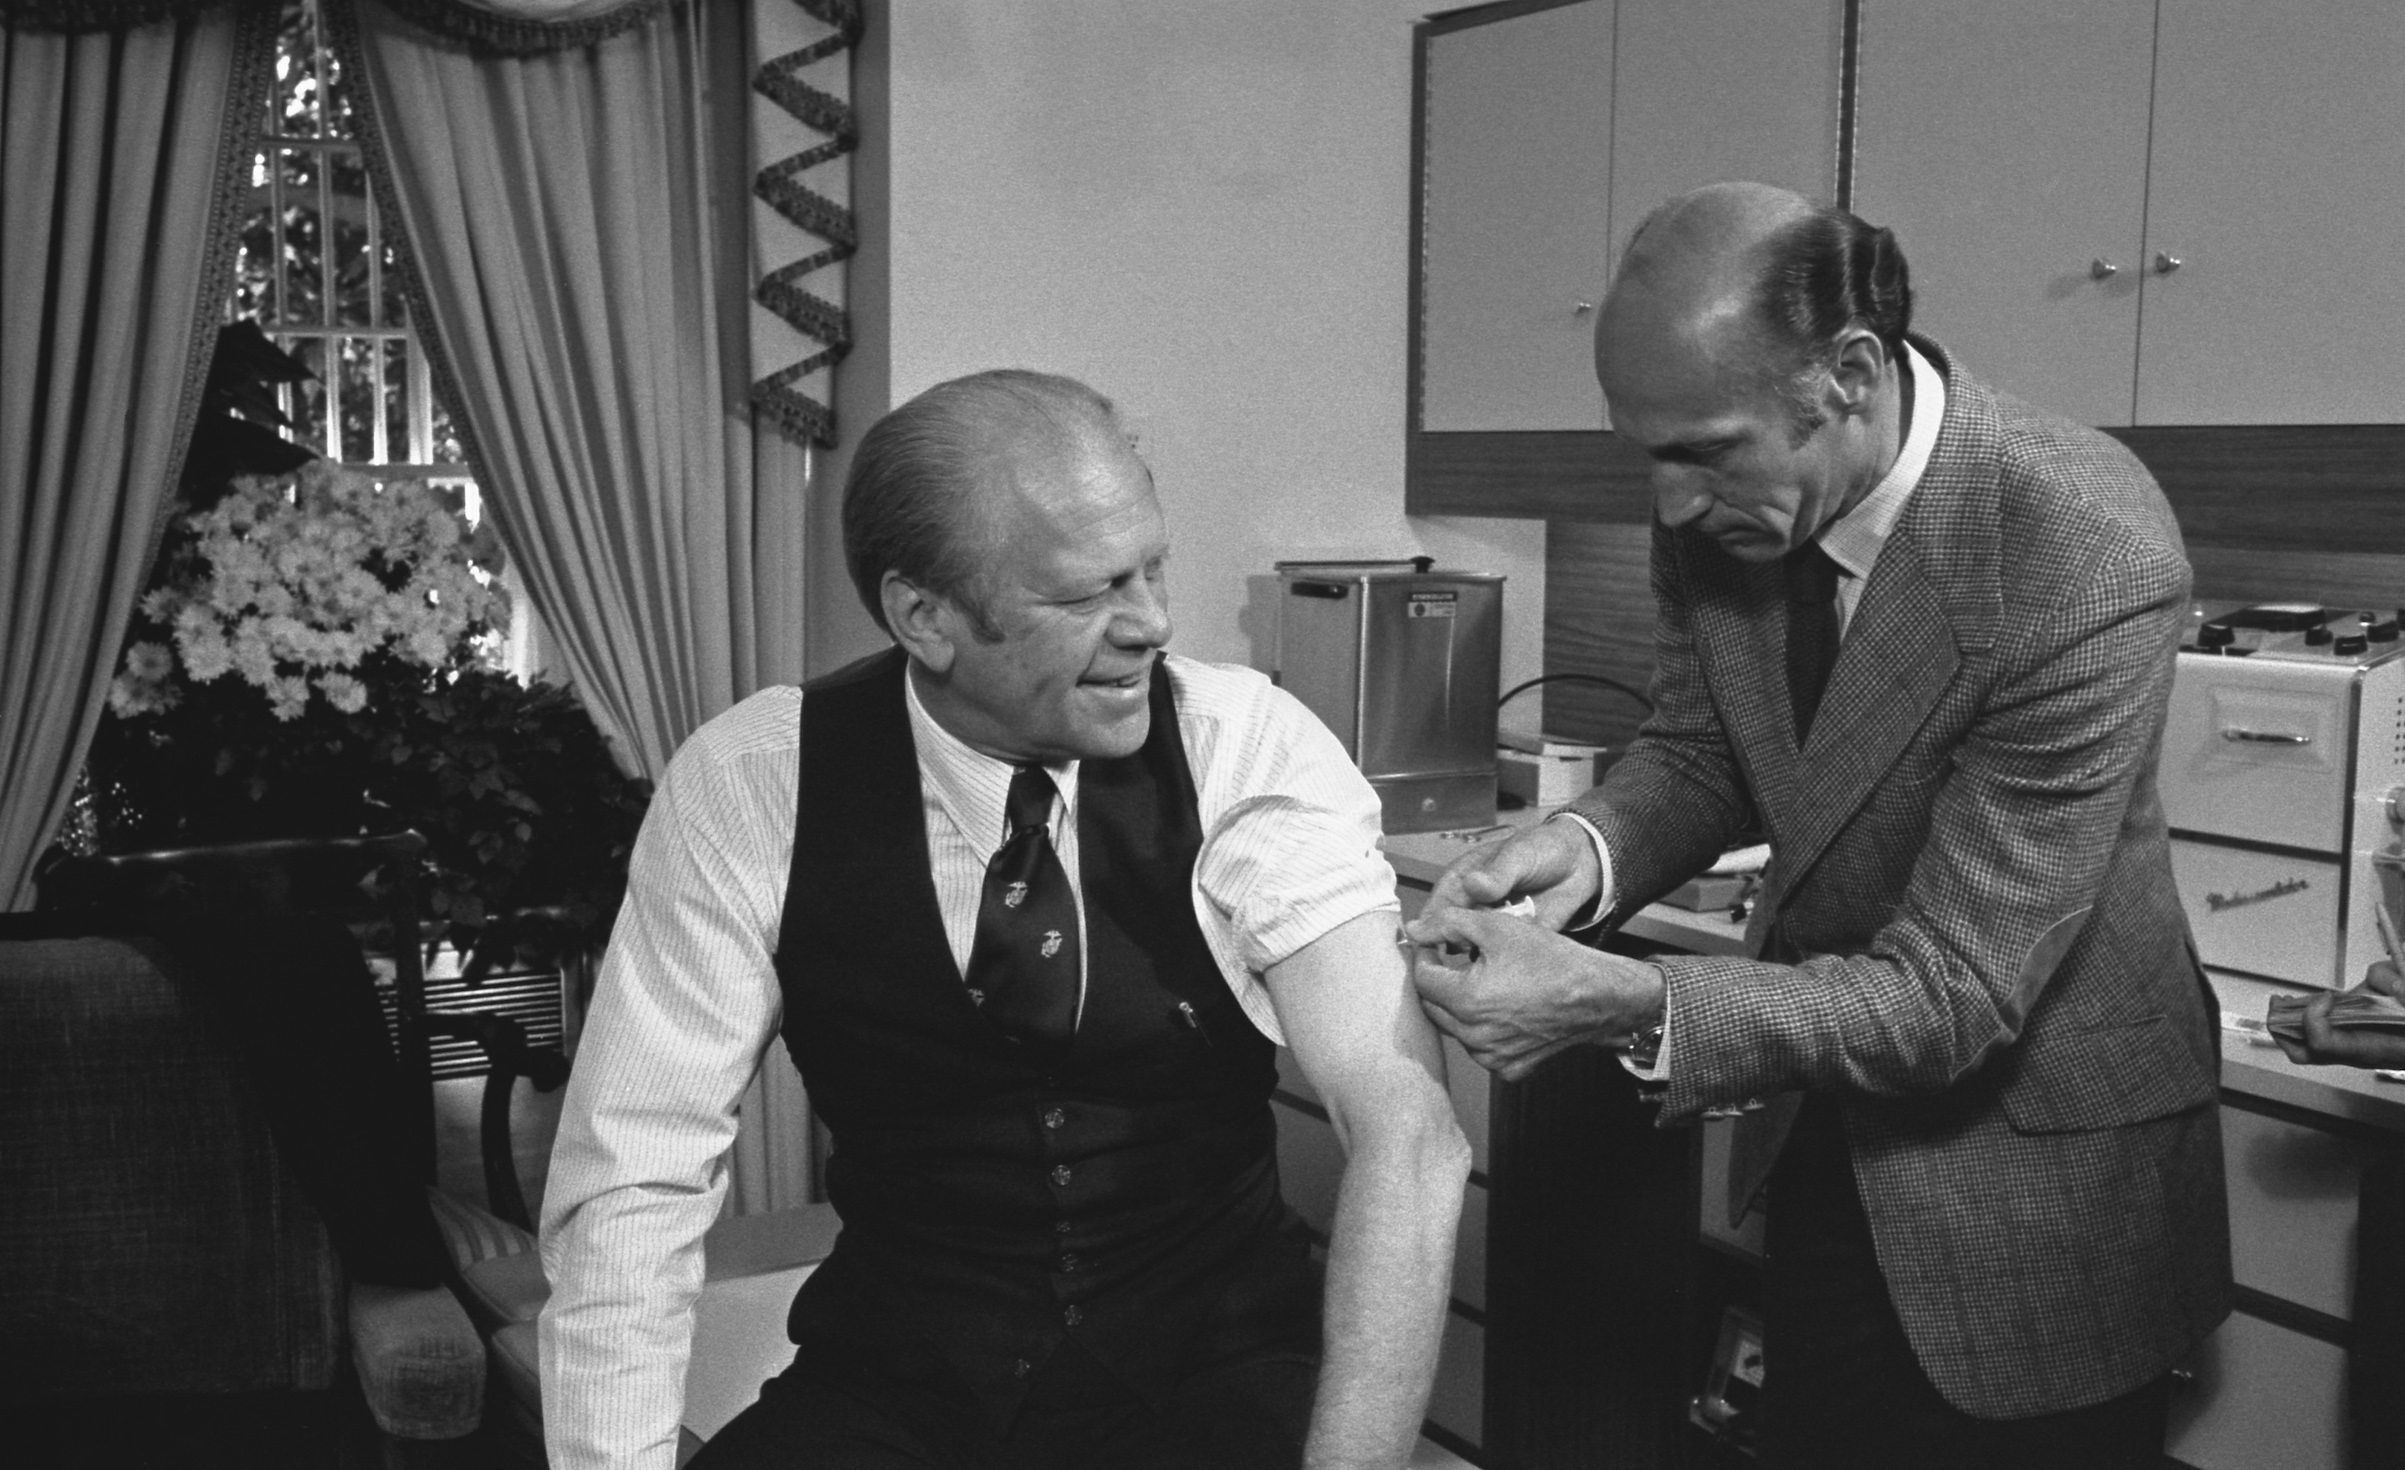 President Gerald Ford is injected with a swine flu inoculation by White House physician Dr. William Lukash, in Washington, D.C., Oct. 14, 1976. (David Hume Kennerly—Gerald R Ford Library/PhotoQuest/Getty Images)